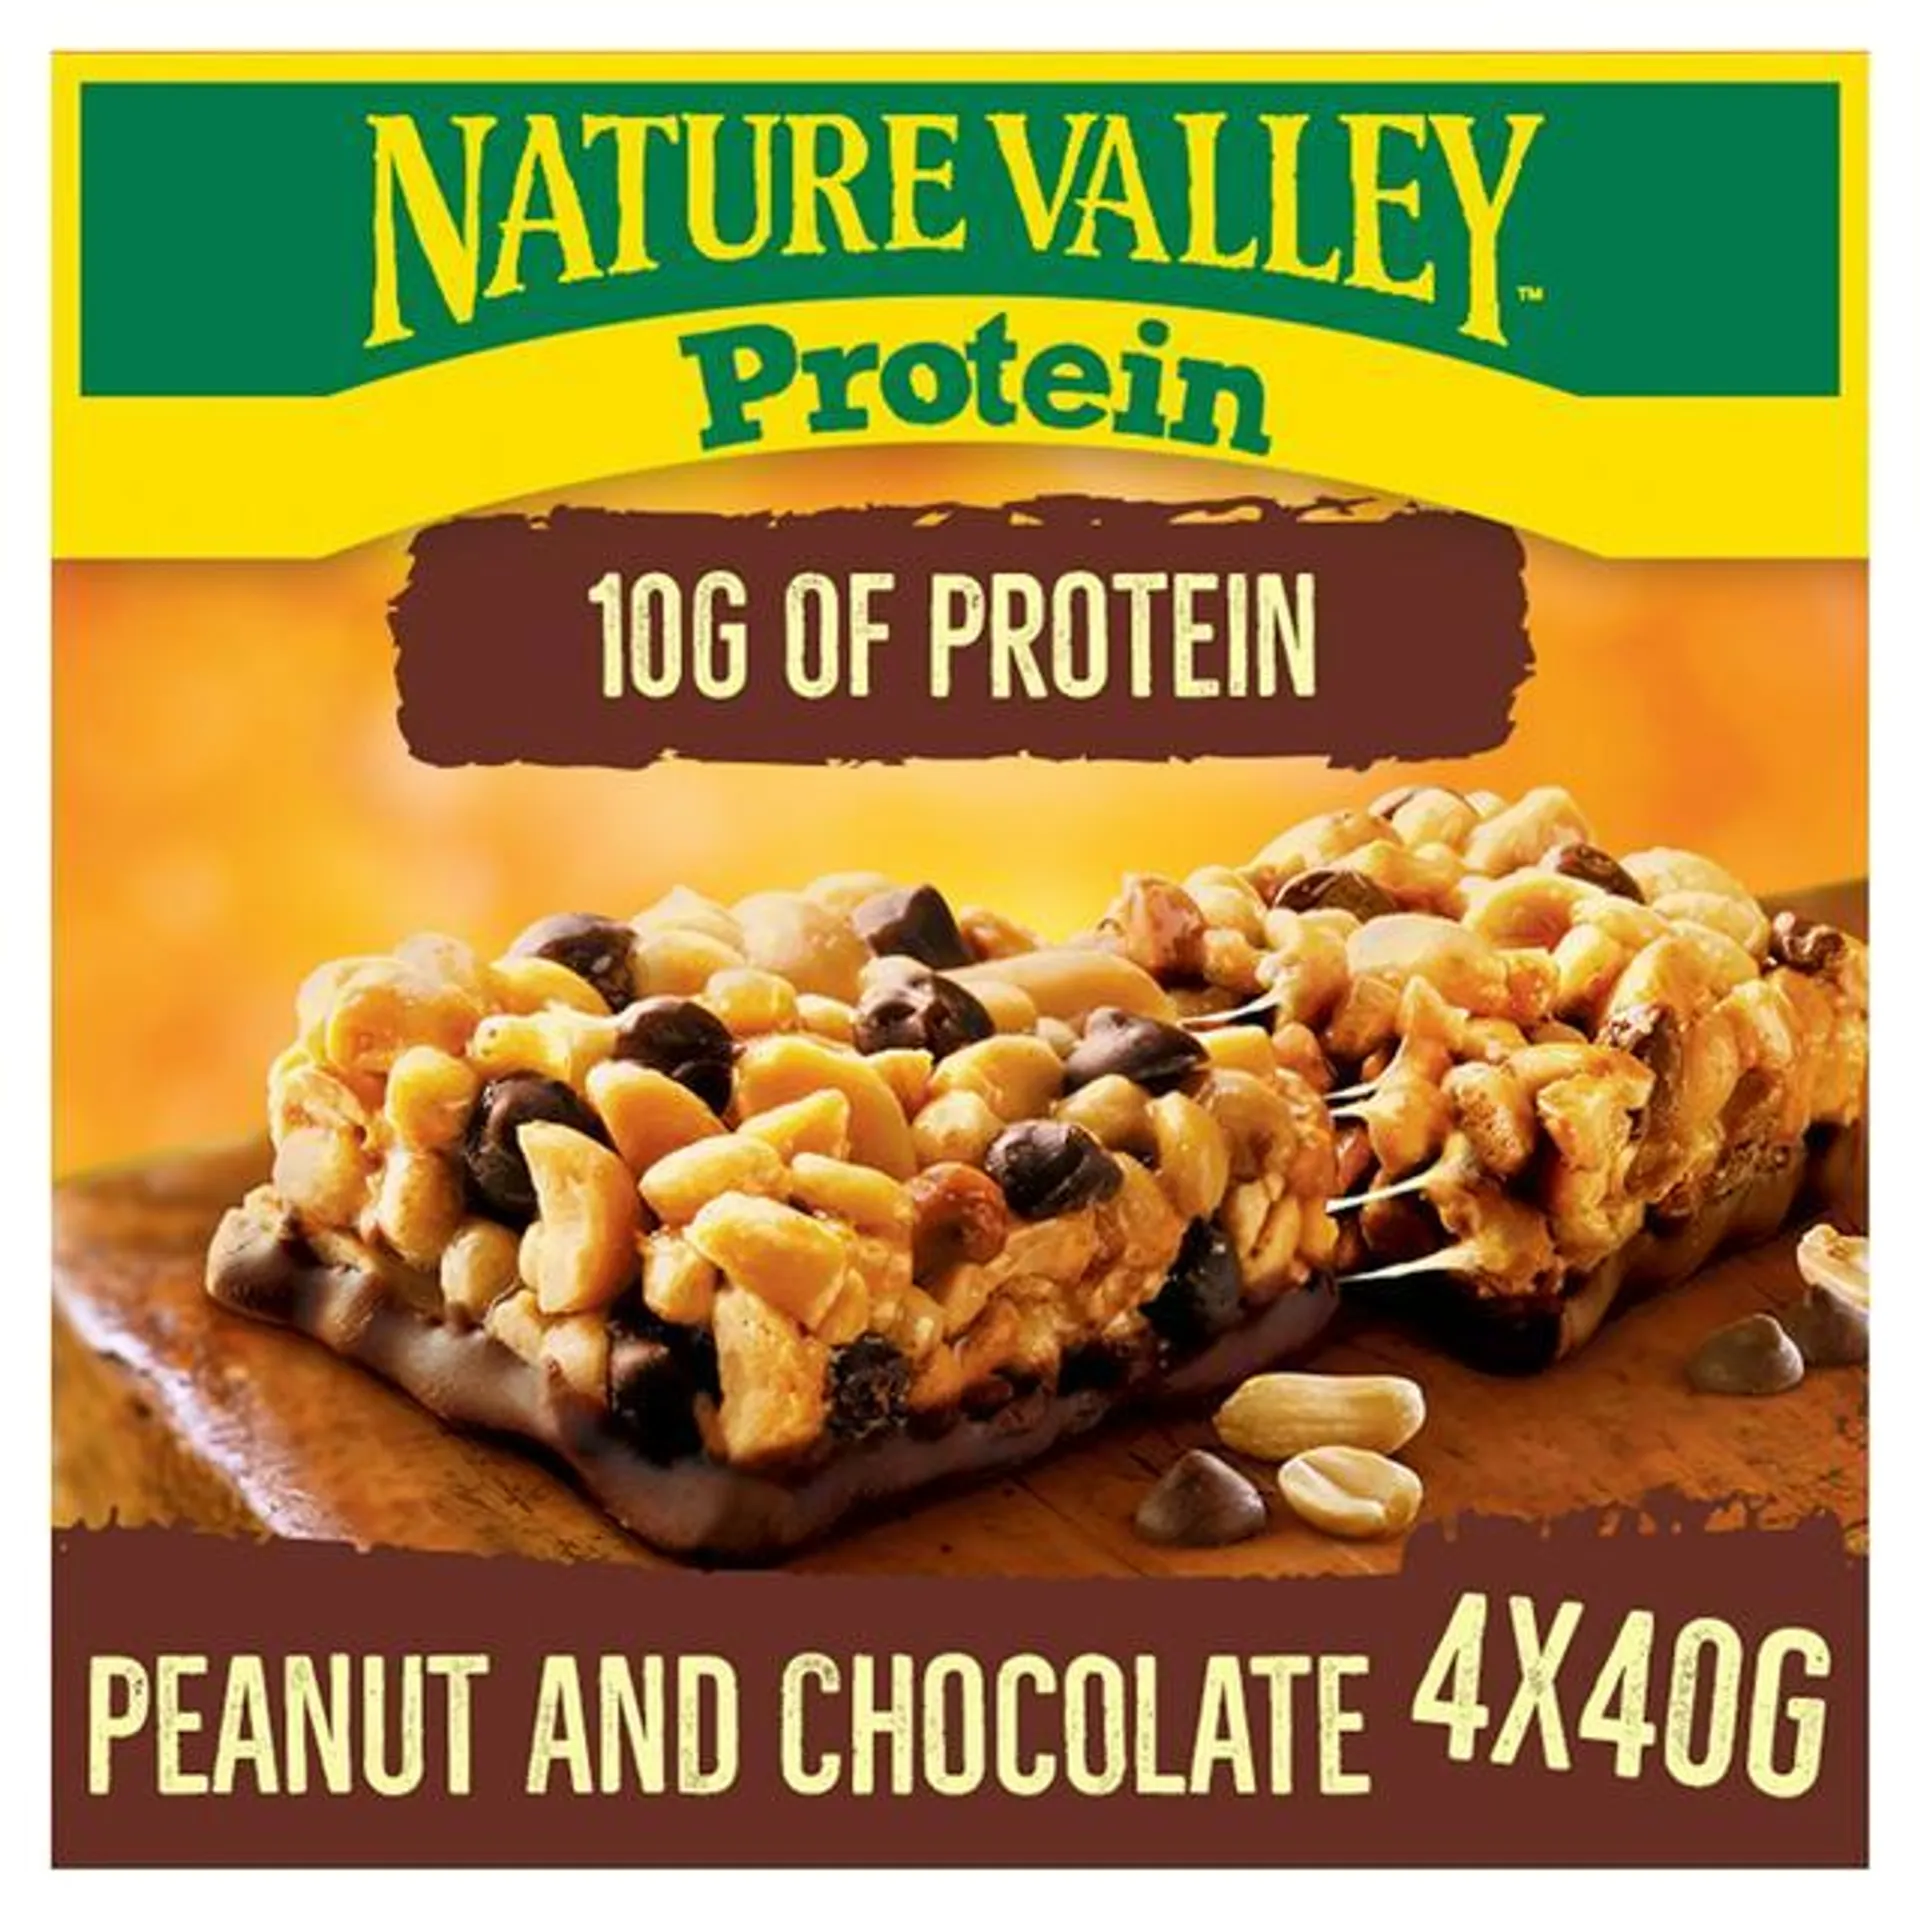 Nature Valley Protein Peanut & Chocolate Cereal Bars 4x42g